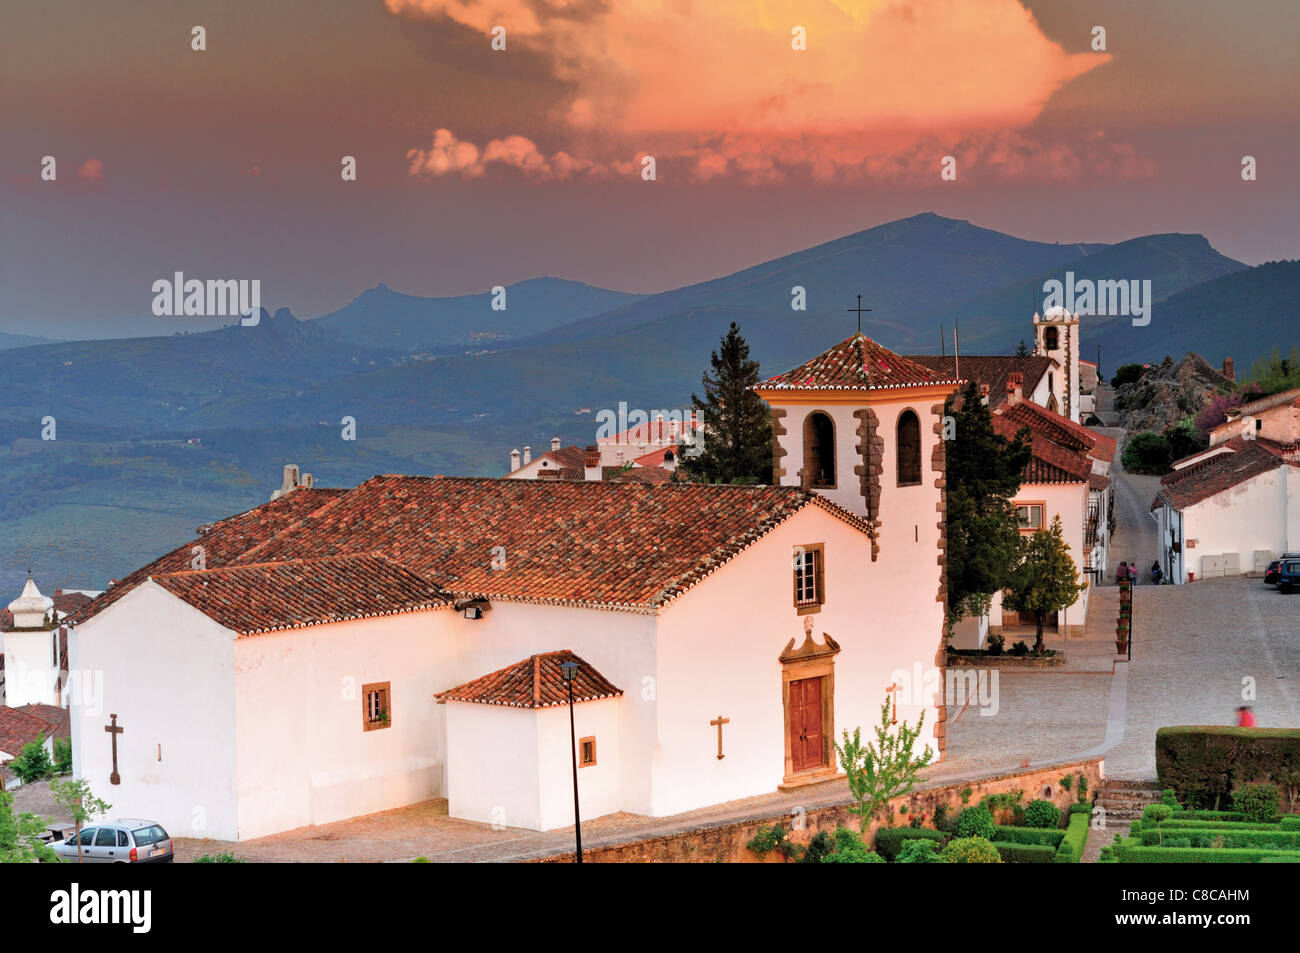 Portugal, Alentejo: View to the historic village of Marvao and the Serra de Sao Mamede in the background Stock Photo